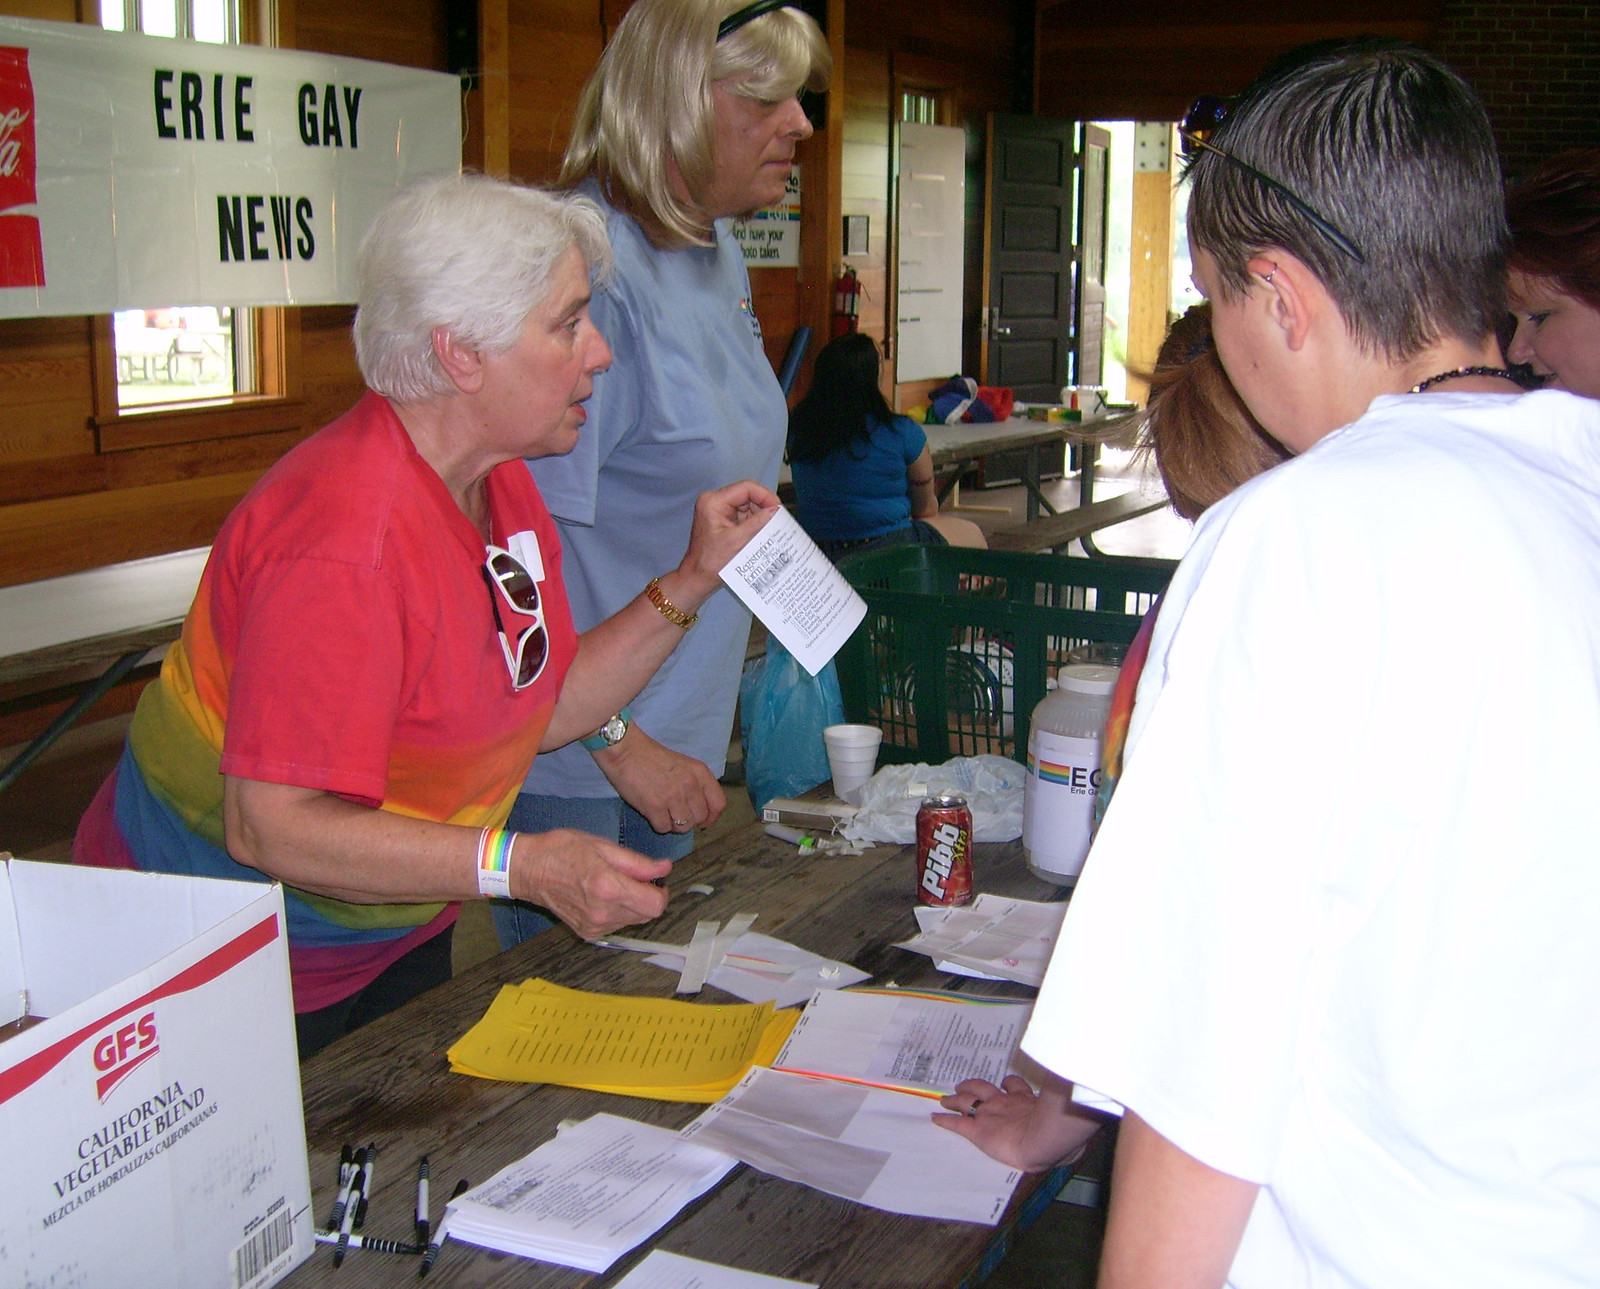 Maureen and Michelle at registration table. Photo by James von Loewe